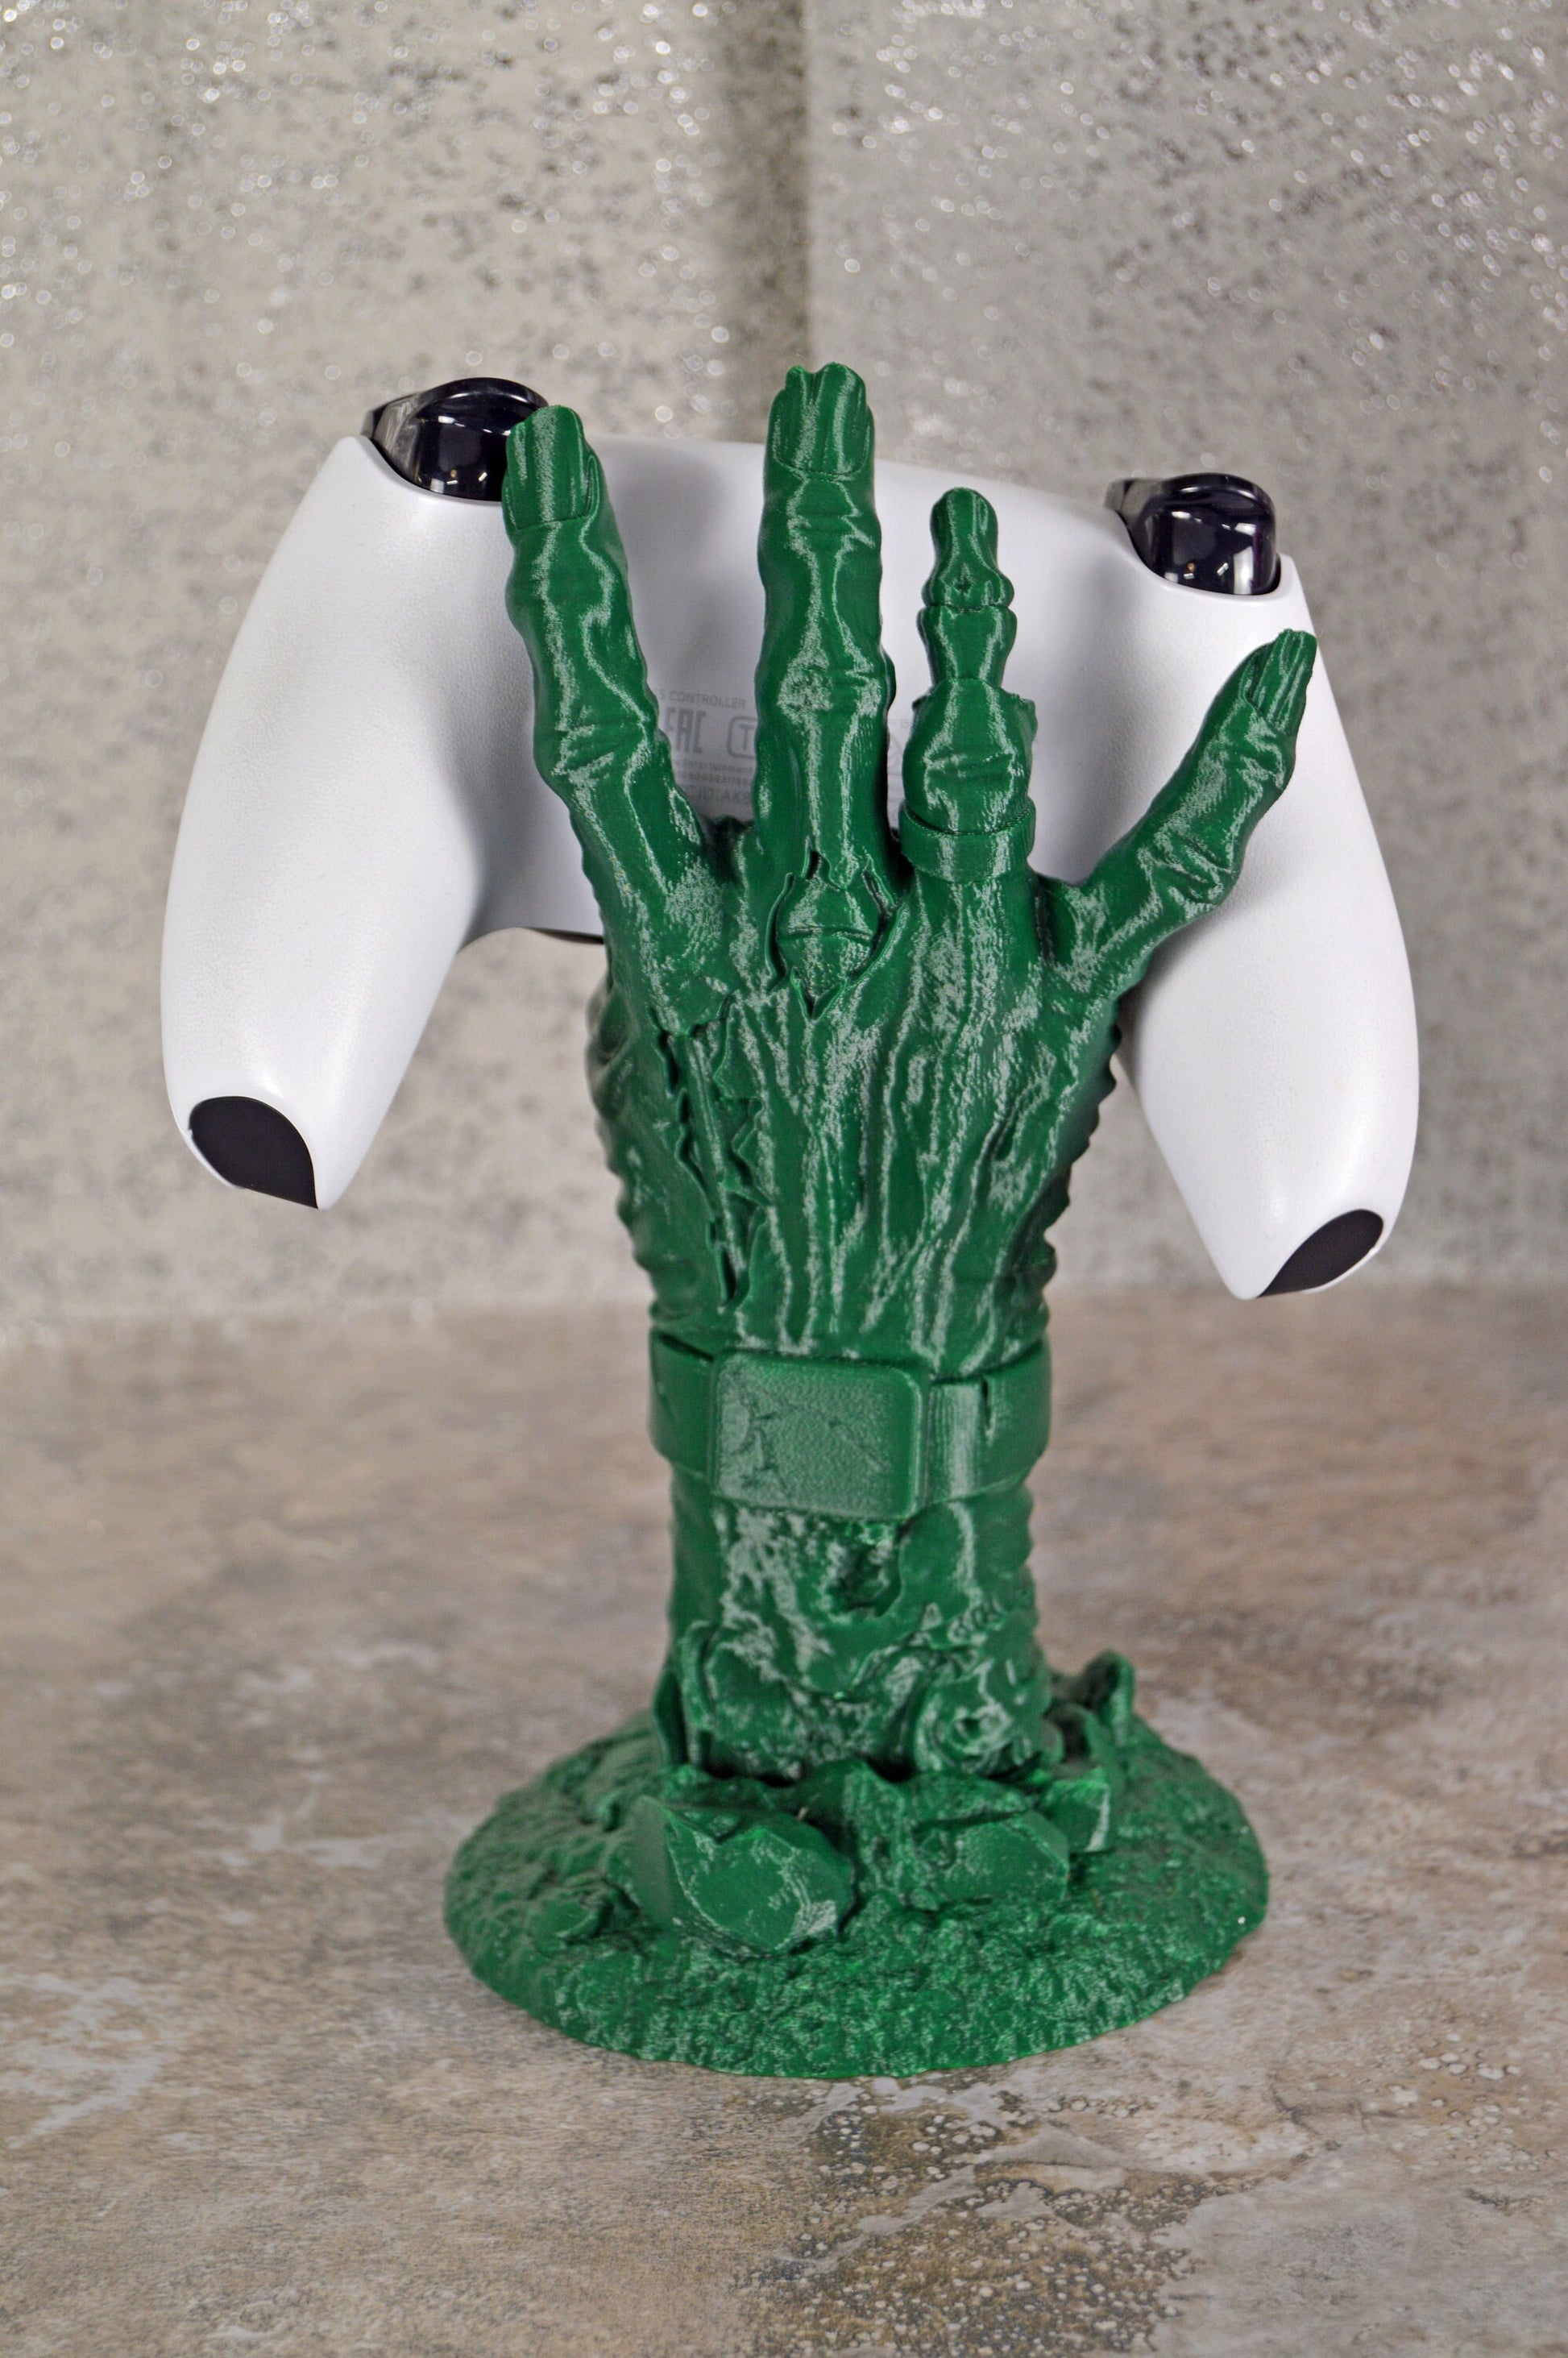 Zombie Hand Controller Holder, Gaming Controller Stand, Controller Display Stand, Controller Holder Desk, Controller Accessories